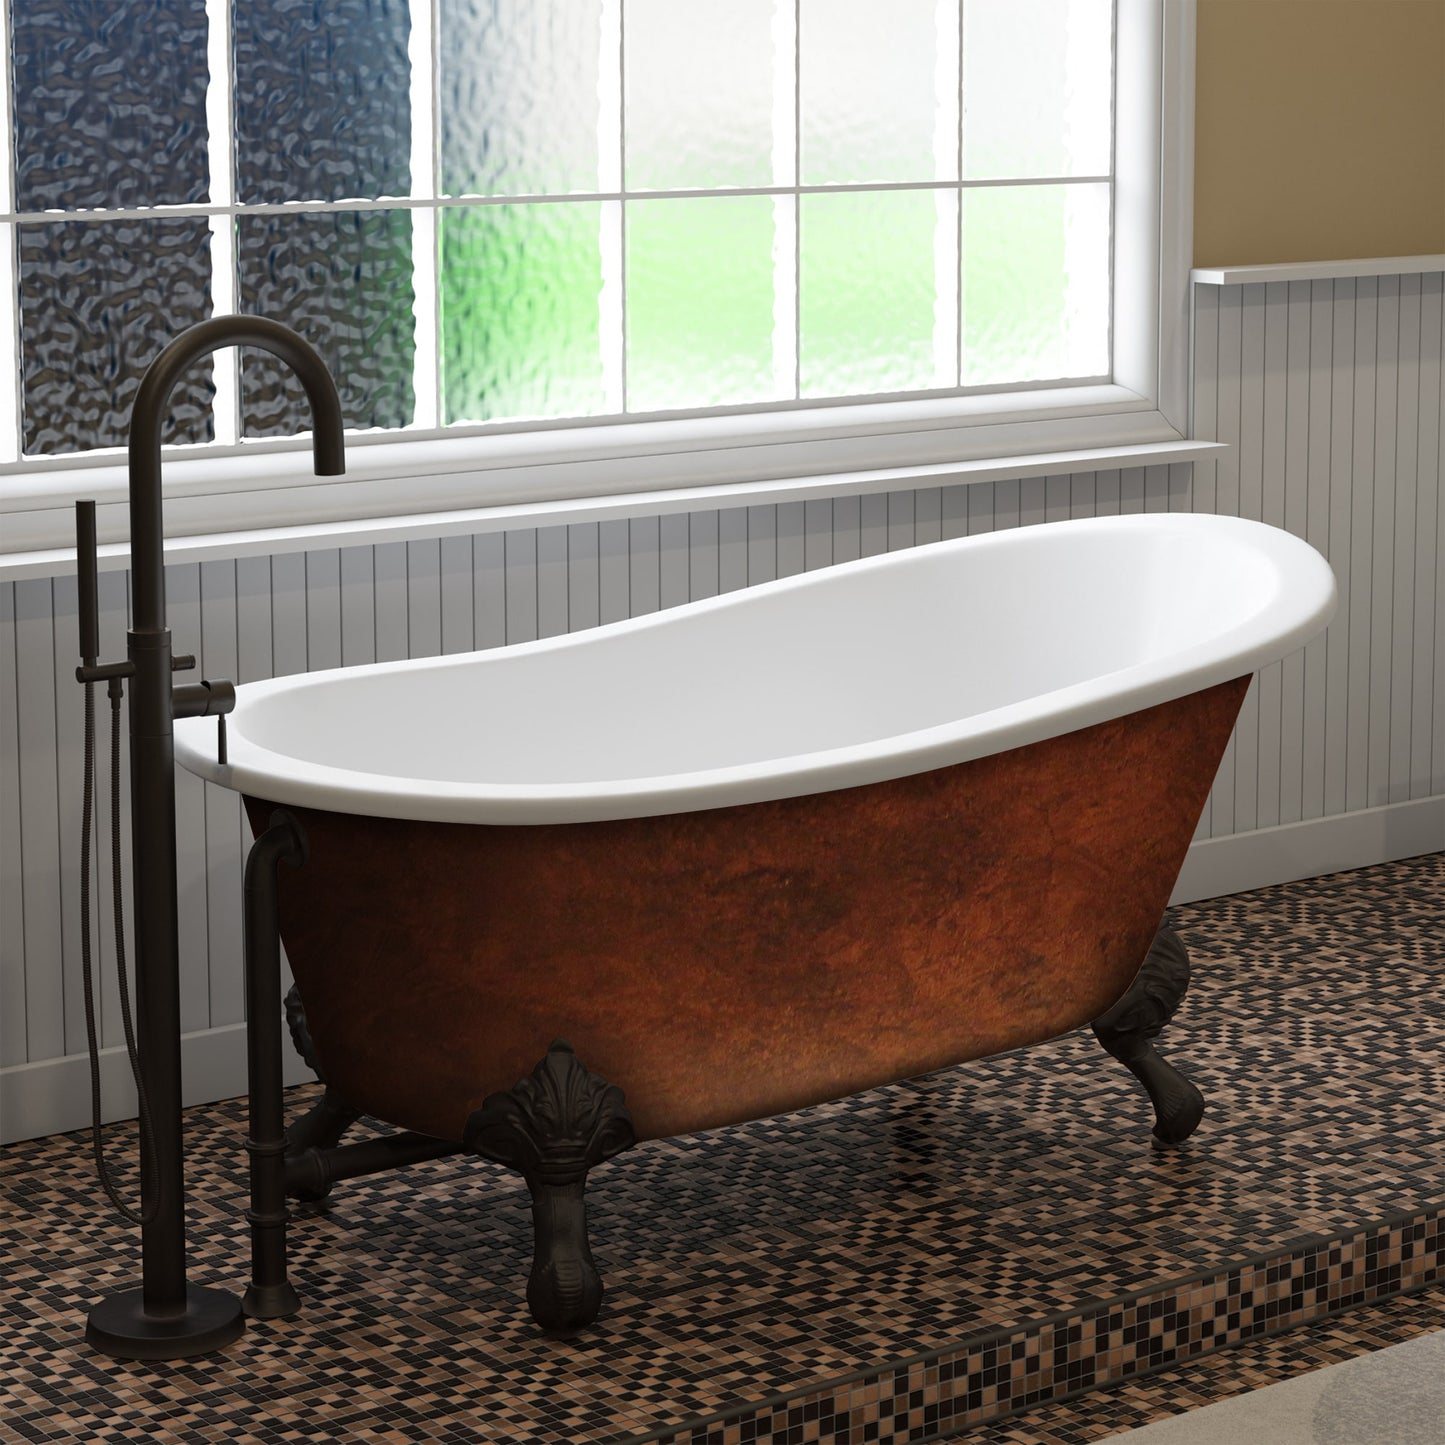 Cast Iron Clawfoot Bathtub 61" X 30" Faux Copper Bronze Finish on Exterior with No Faucet Drillings and Oil Rubbed Bronze Feet - ST61-NH-ORB-CB